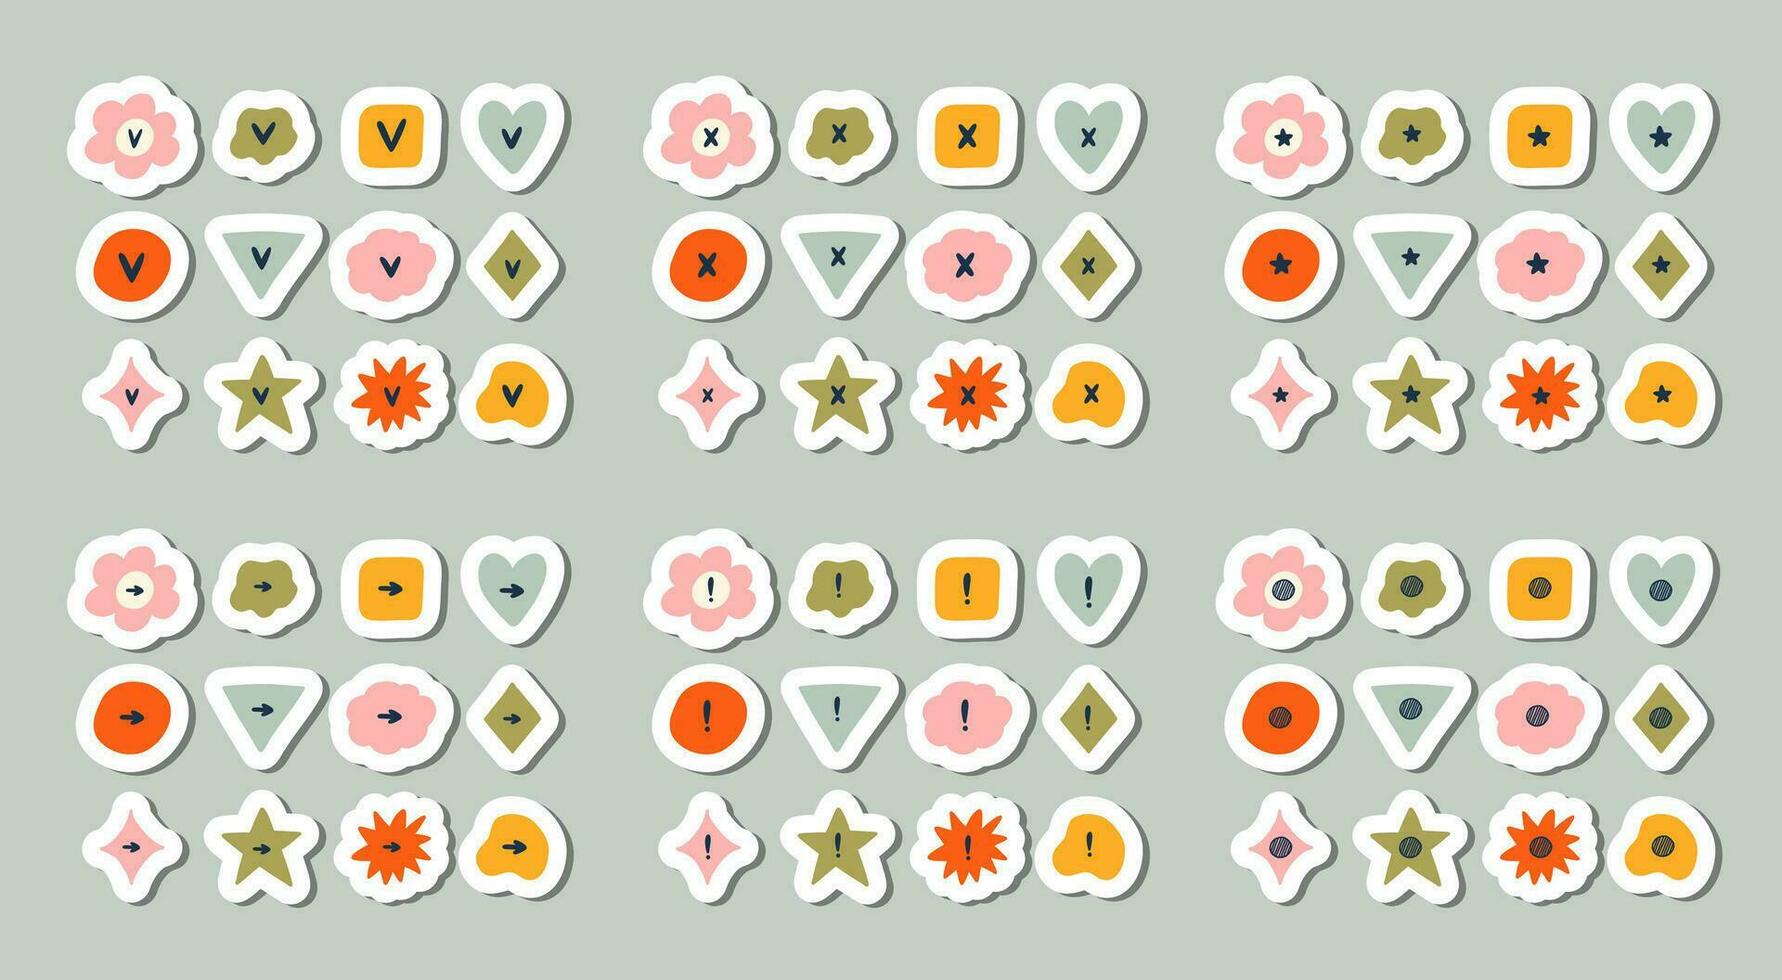 Cute hand drawn sticker set of check and cross mark set with checkboxes in the shape of flower, star, heart, circle, cloud. V, X, yes, no, ok, arrow, exclamation point, star sign for bullet journal. vector